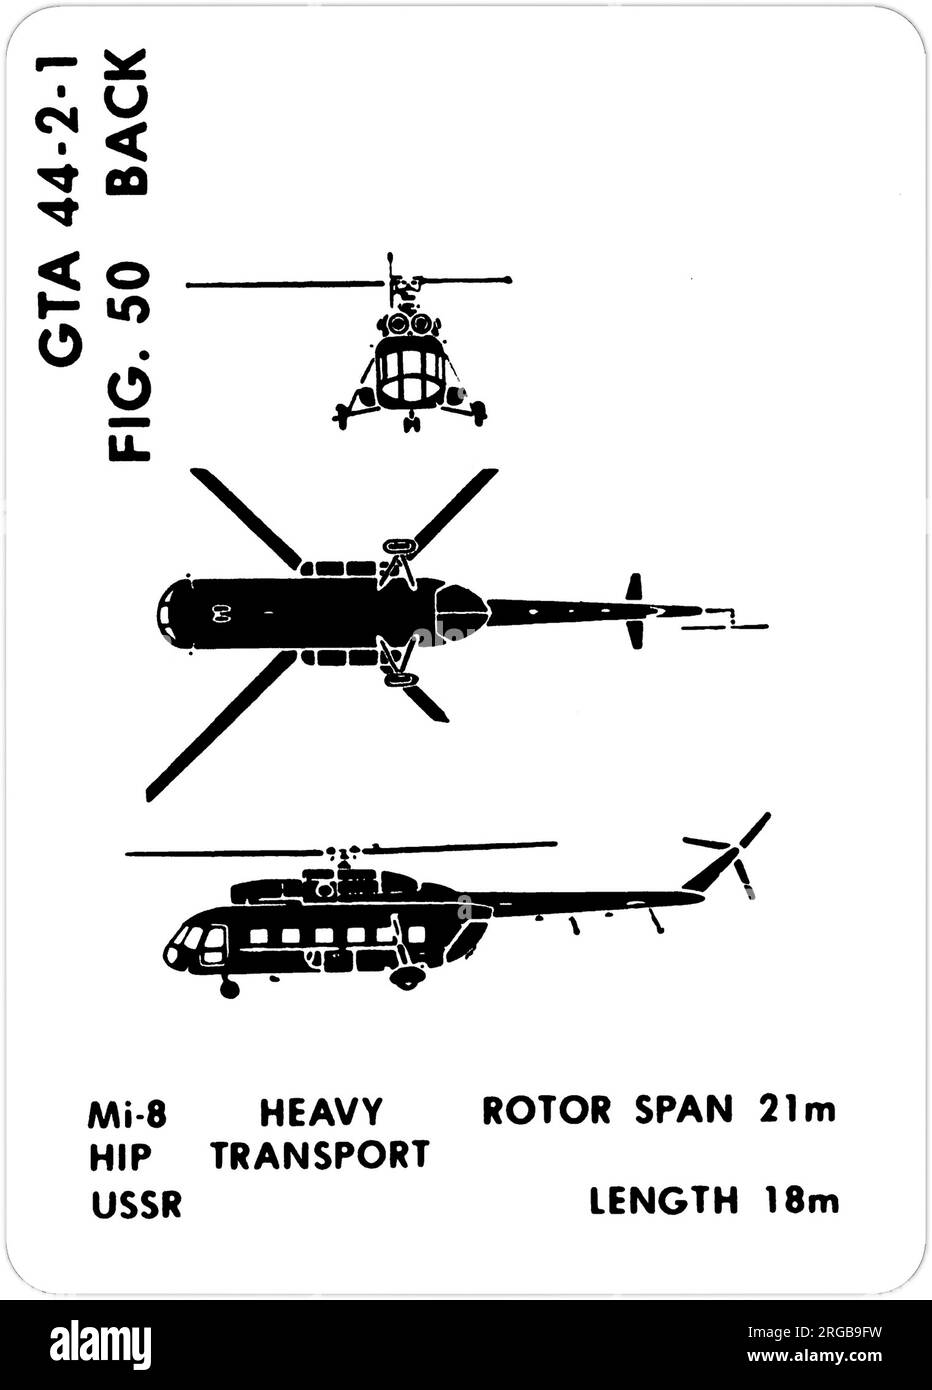 Mil Mi-8 (NATO codename: Hip). This is one of the series of Graphics Training Aids (GTA) used by the United States Army to train their personnel to recognize friendly and hostile aircraft. This particular set, GTA 44-2-1, was issued in July1977. The set features aircraft from: Canada, Italy, United Kingdom, United States, and the USSR. Stock Photo